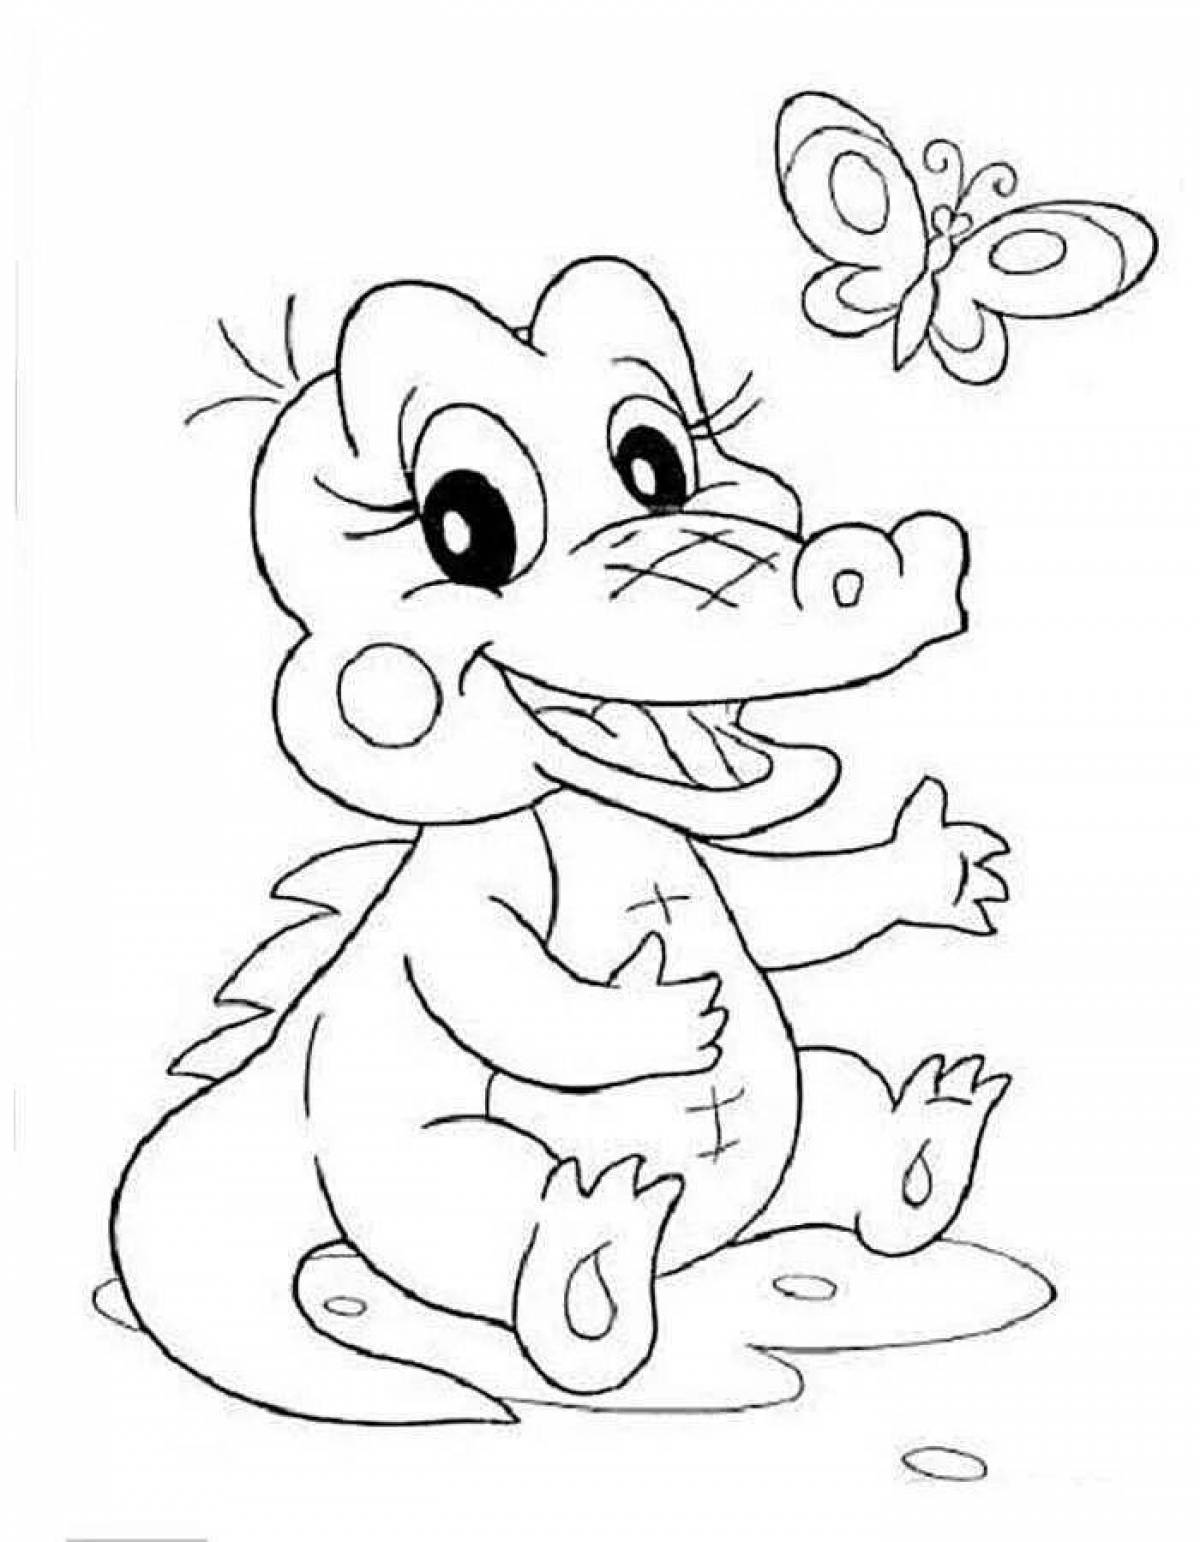 Inspirational coloring page 4 5